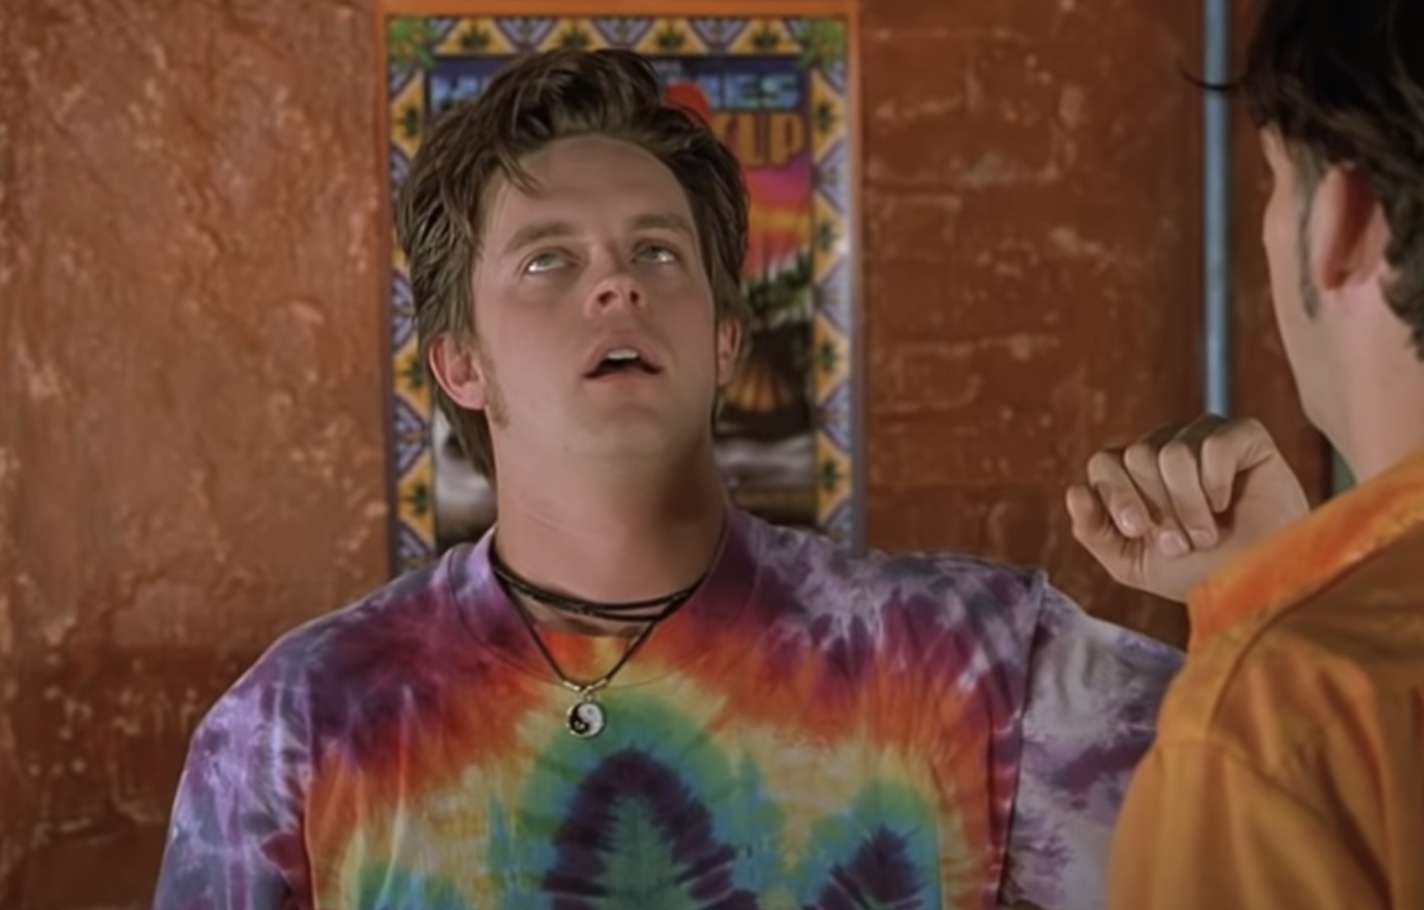 Breuer wears a tie-dyed shirt and looks very stoned in the film